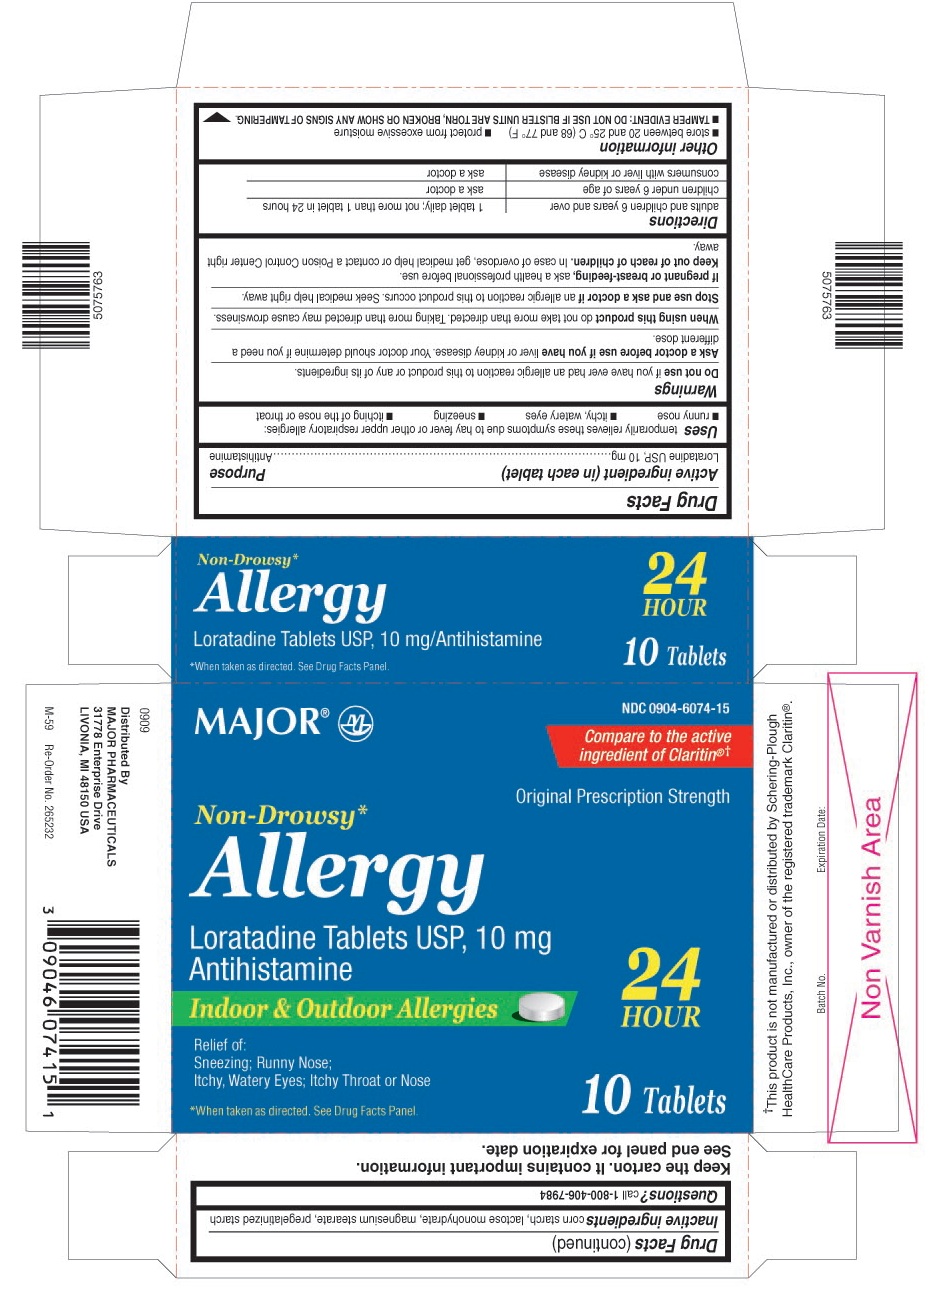 This is the blister carton label for 10 count Loratadine tablets USP, 10 mg.